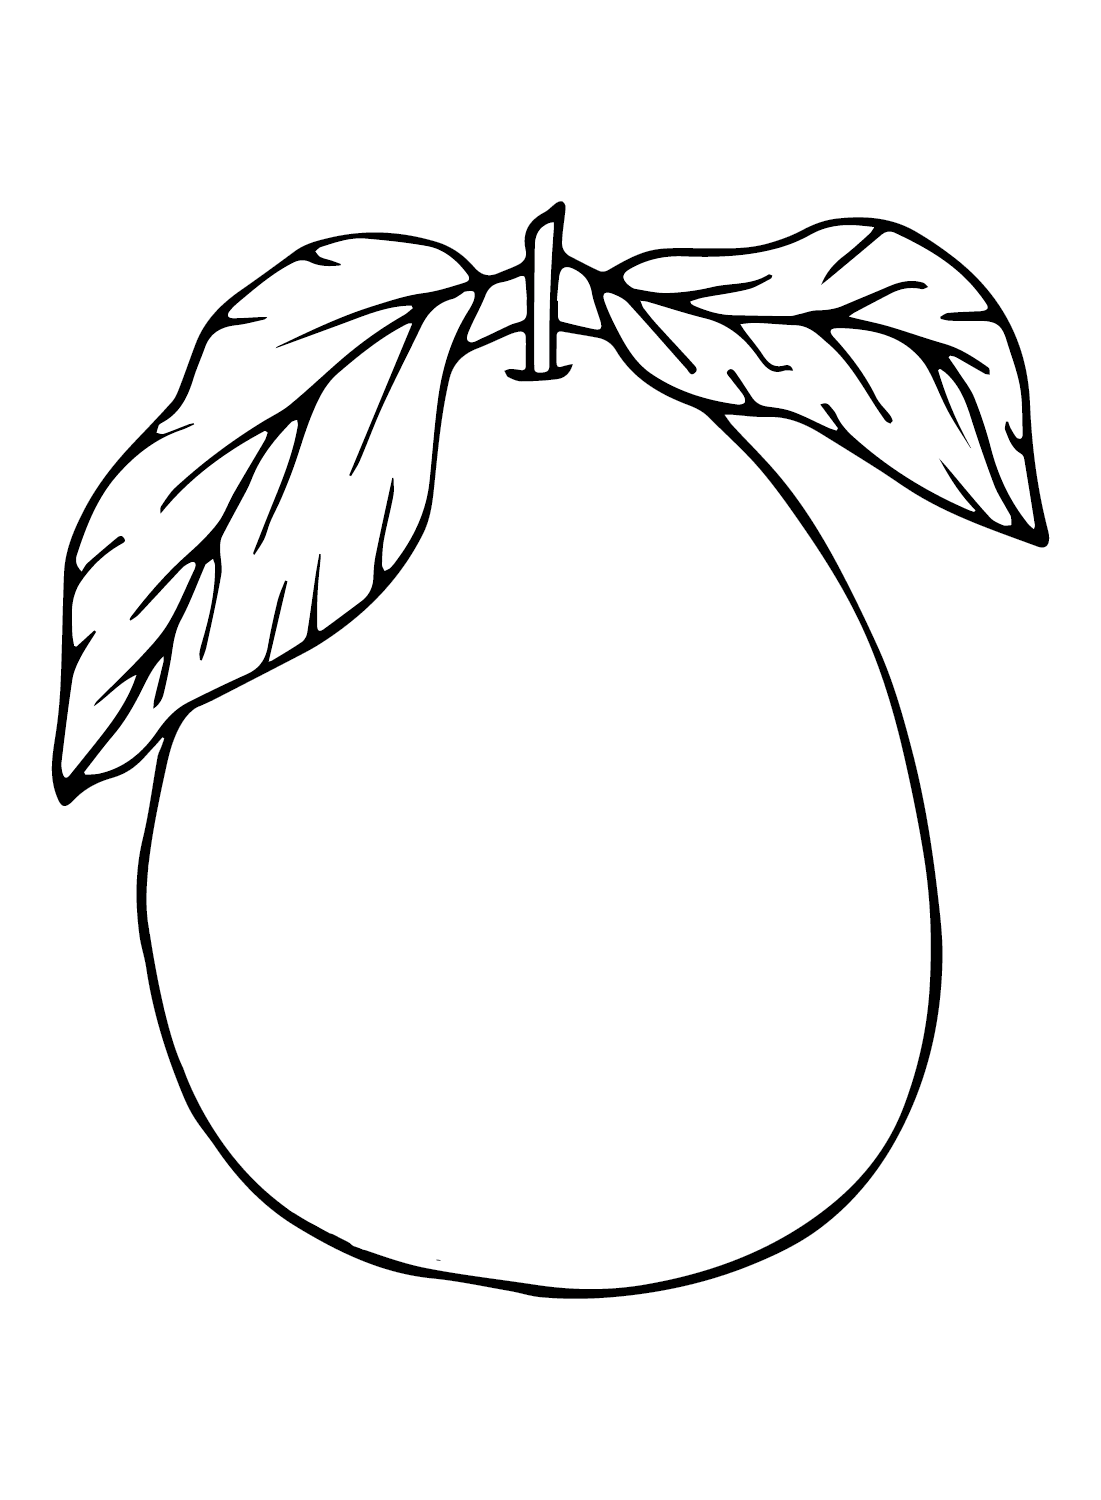 The Pomelo from Pomelo